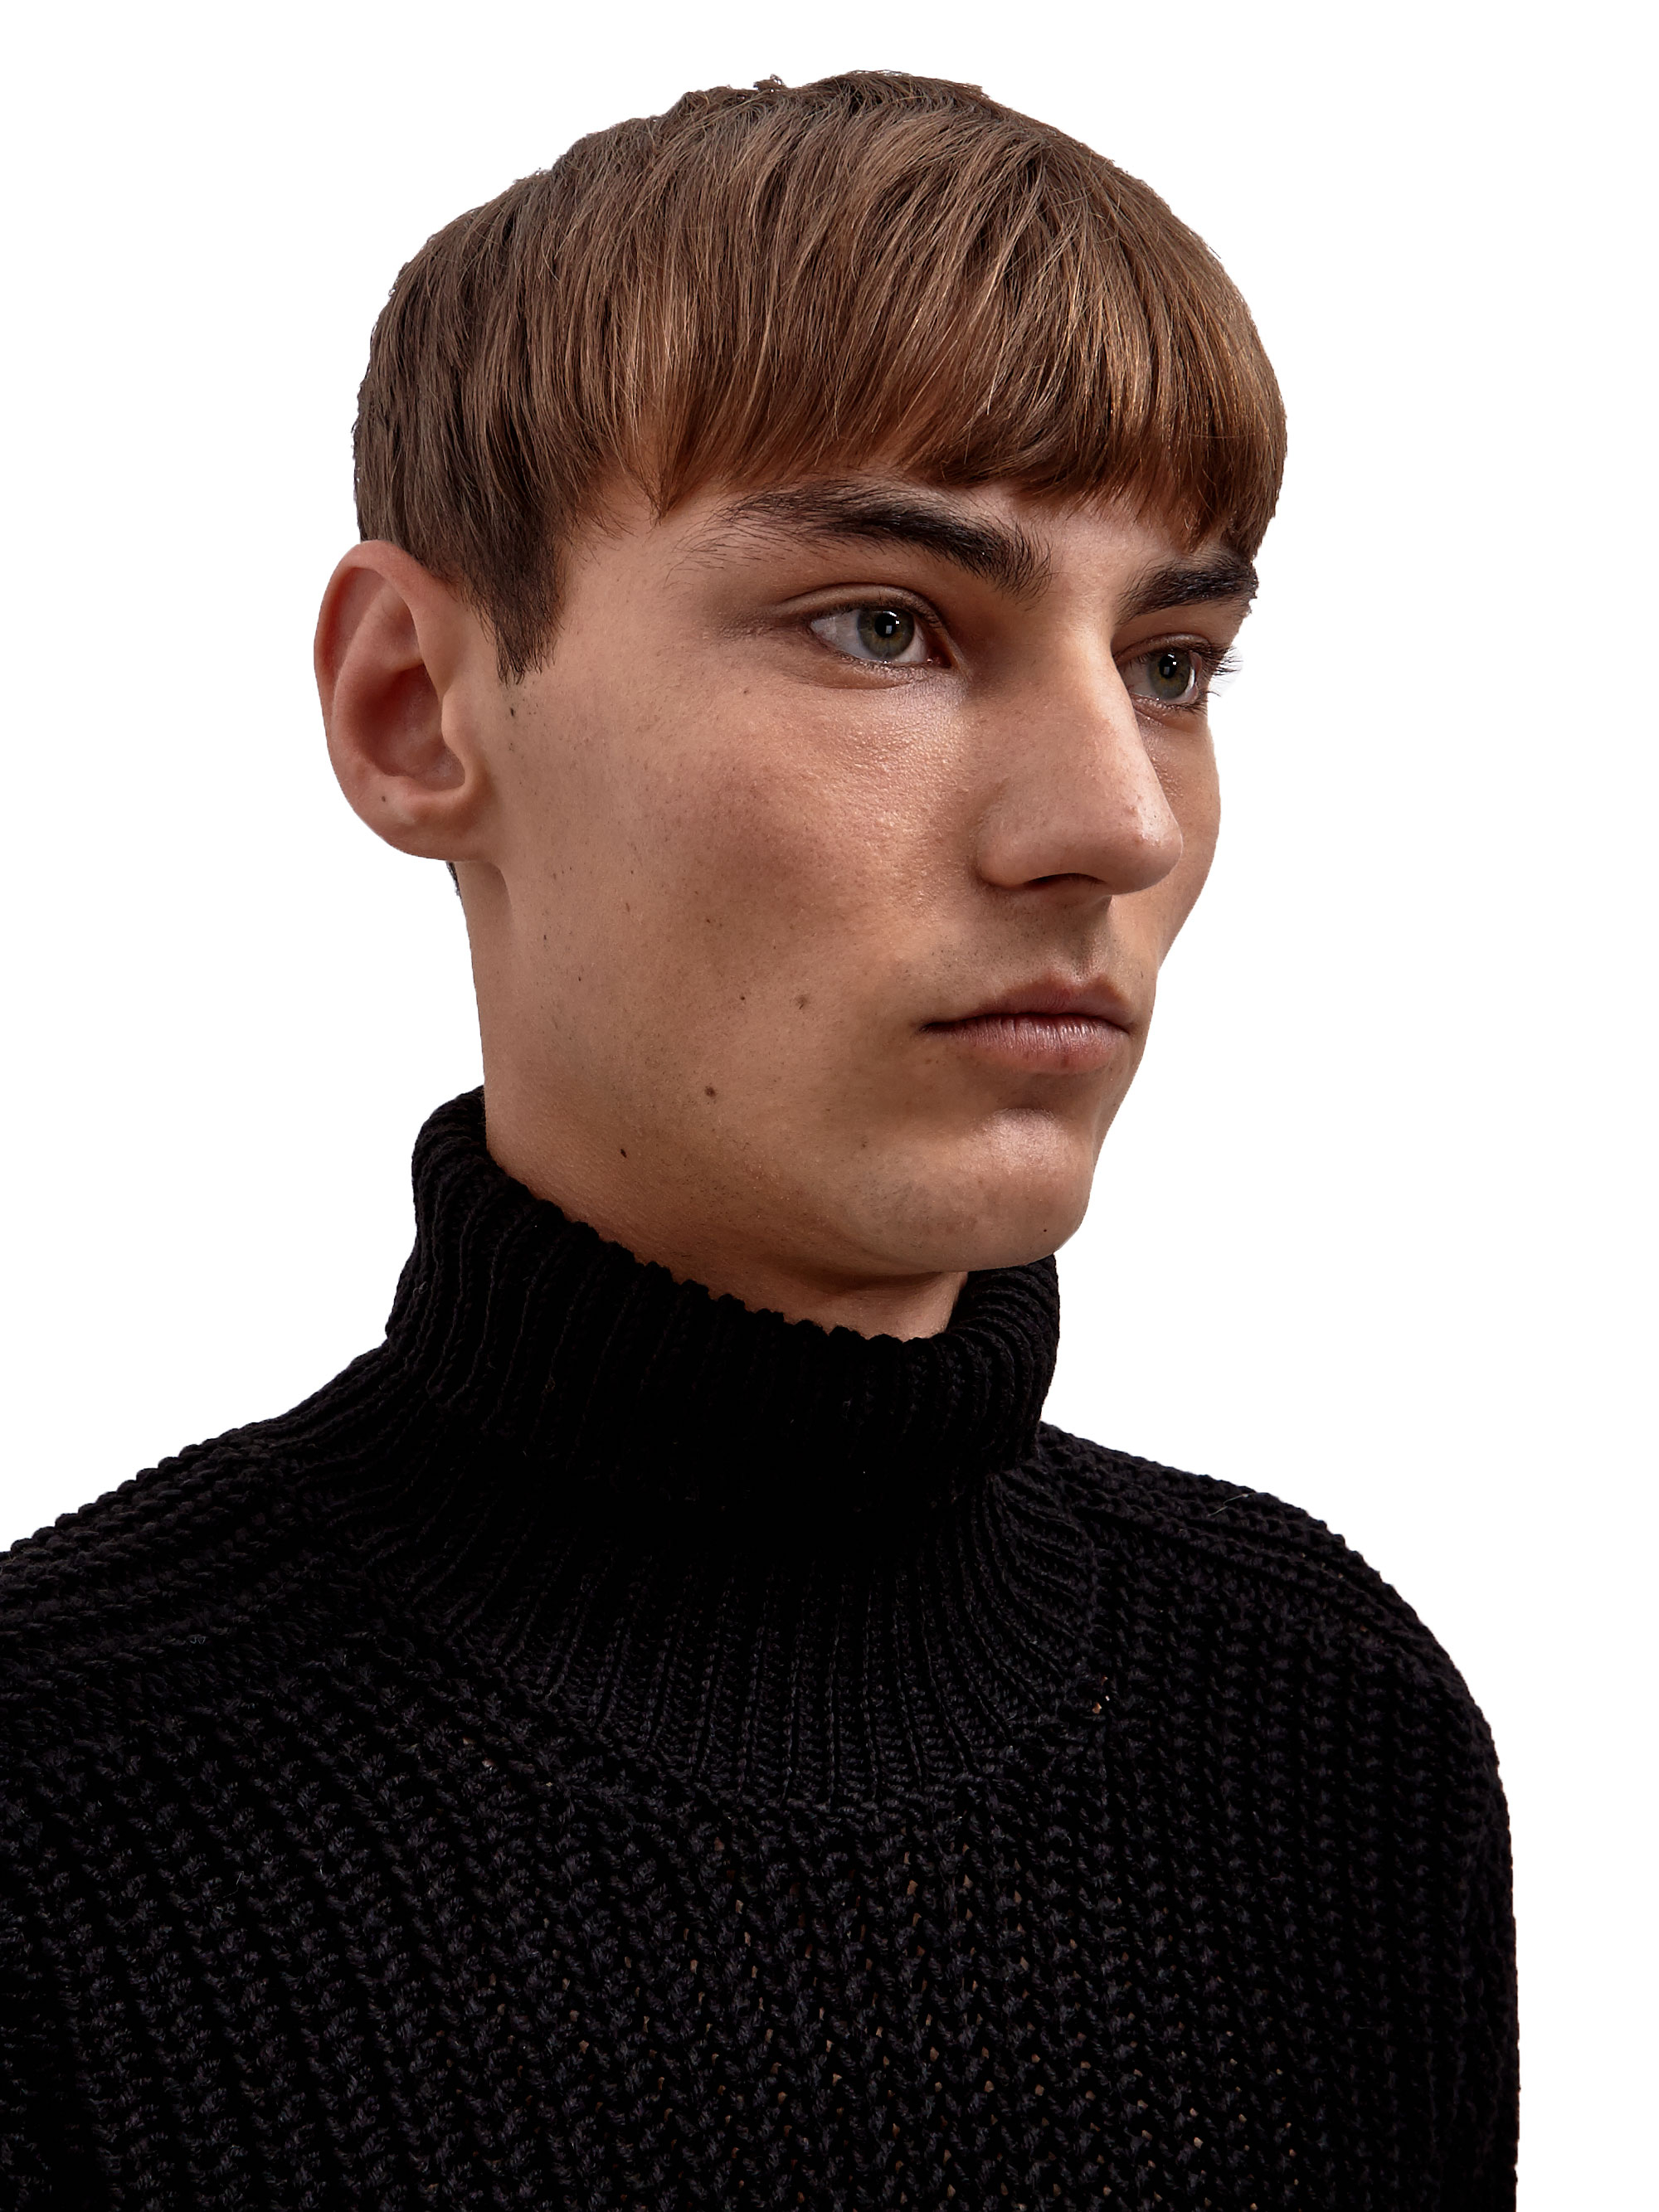 Lyst - Rick owens Mens High Neck Sweater in Black for Men